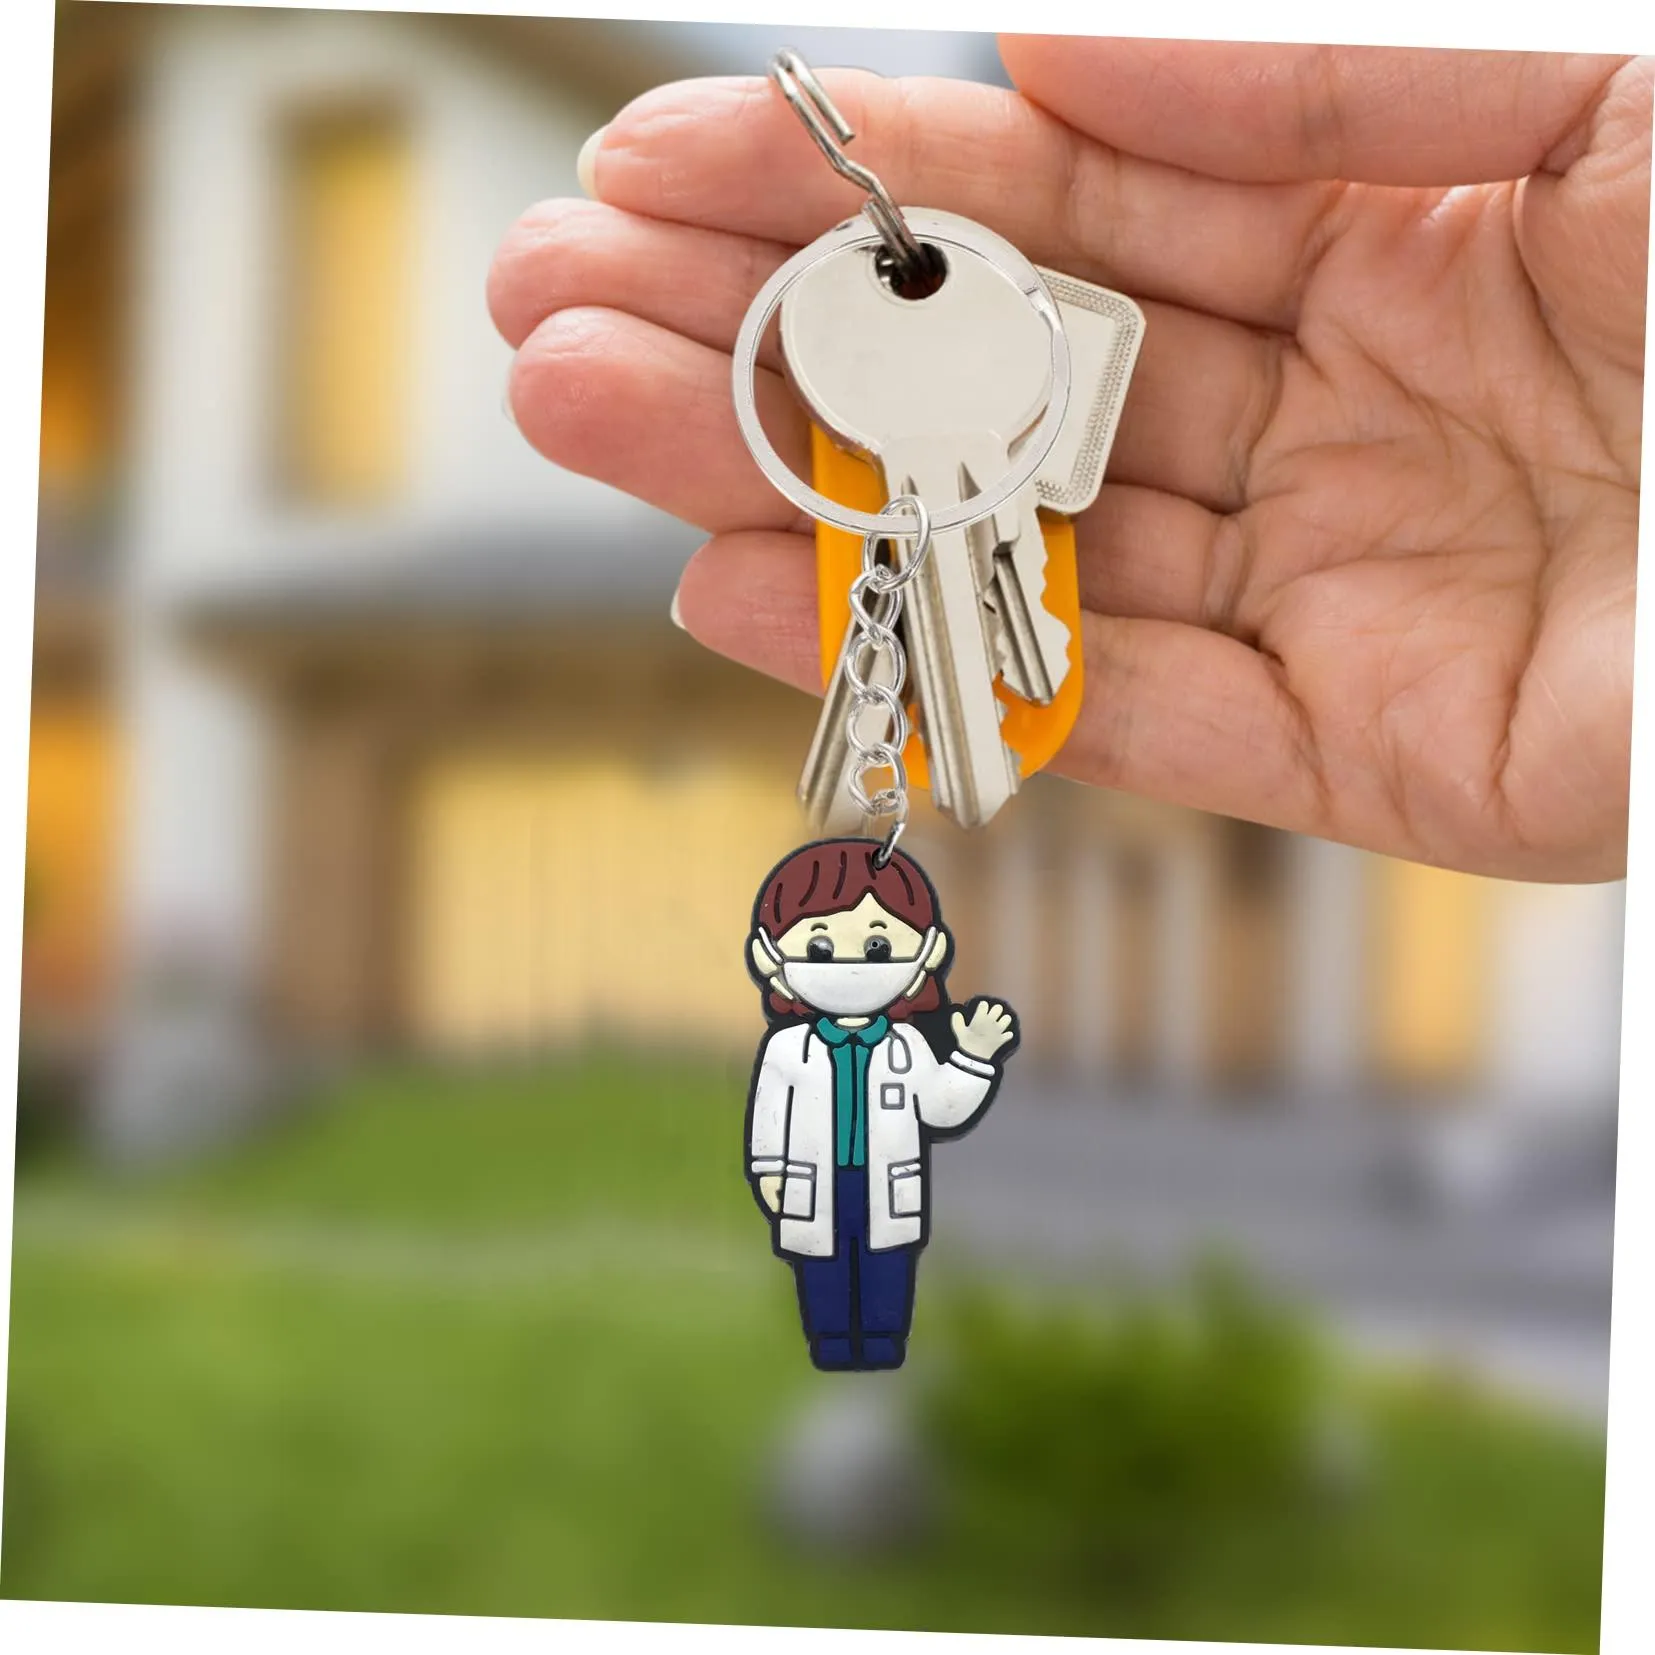 doctor keychain keychains for men goodie bag stuffers supplies backpack keyring suitable schoolbag key ring boys classroom school day birthday party gift